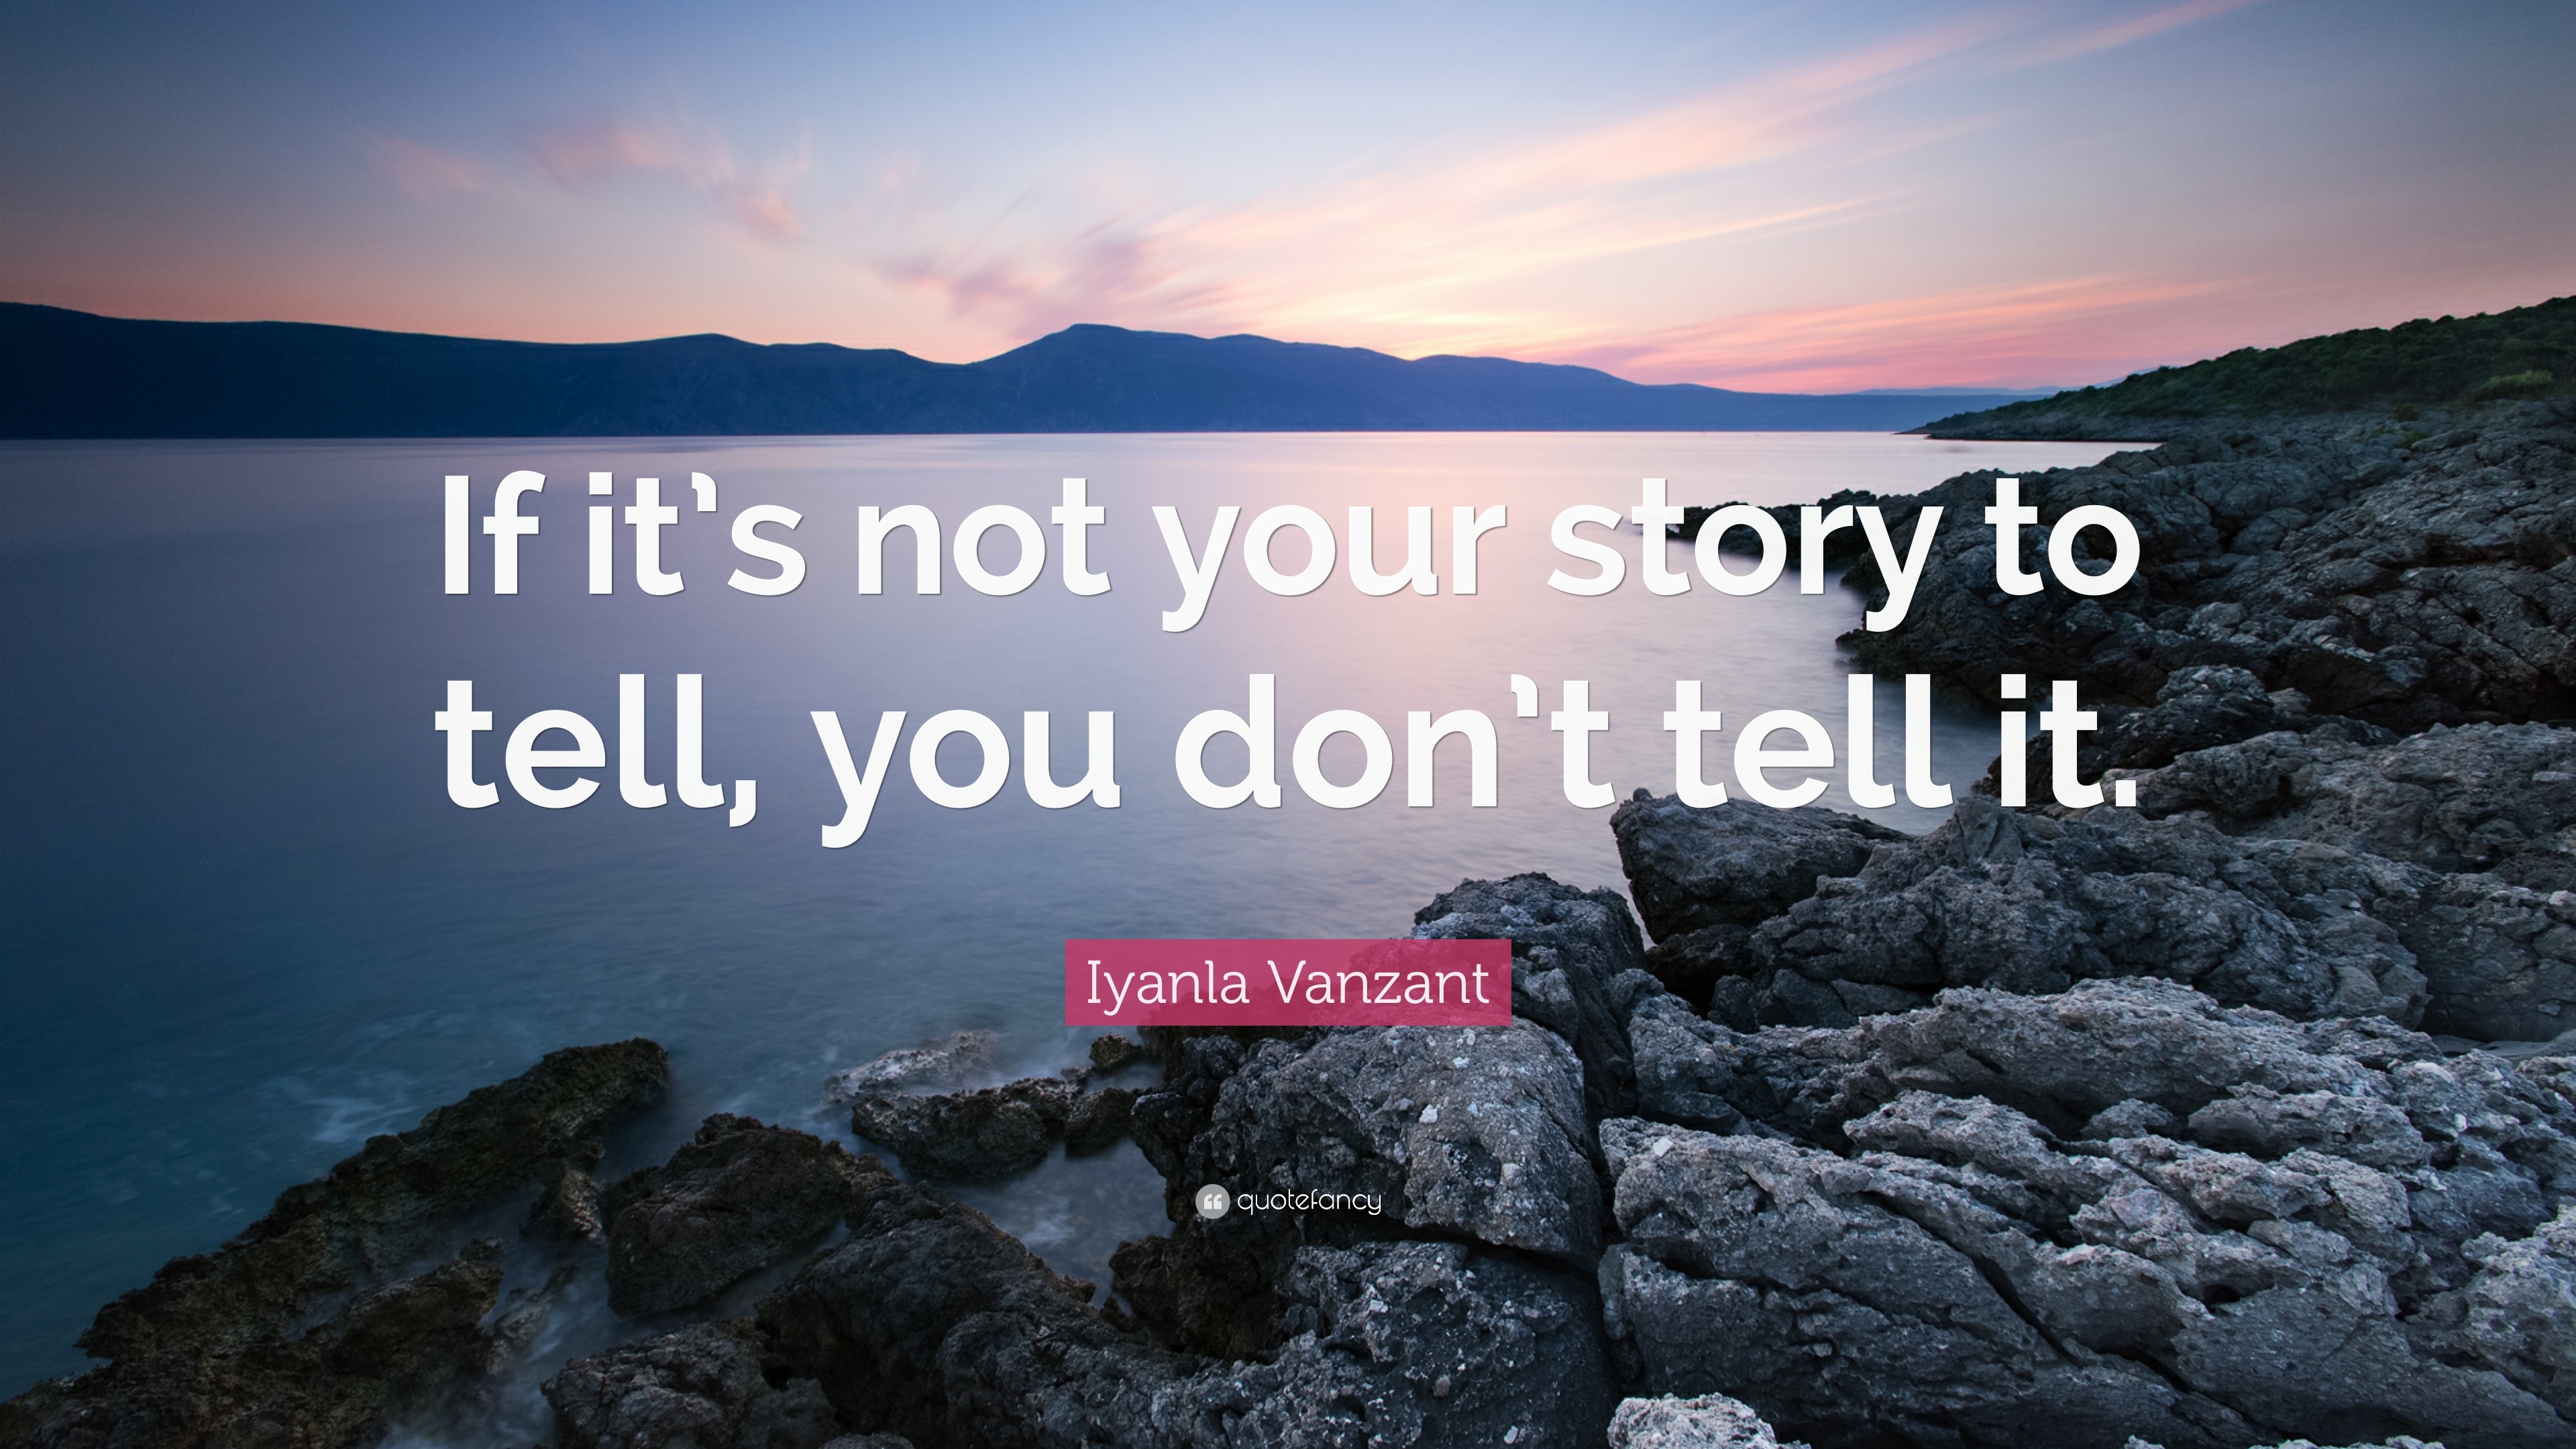 Iyanla Vanzant Quote If It S Not Your Story To Tell You Don T Tell It